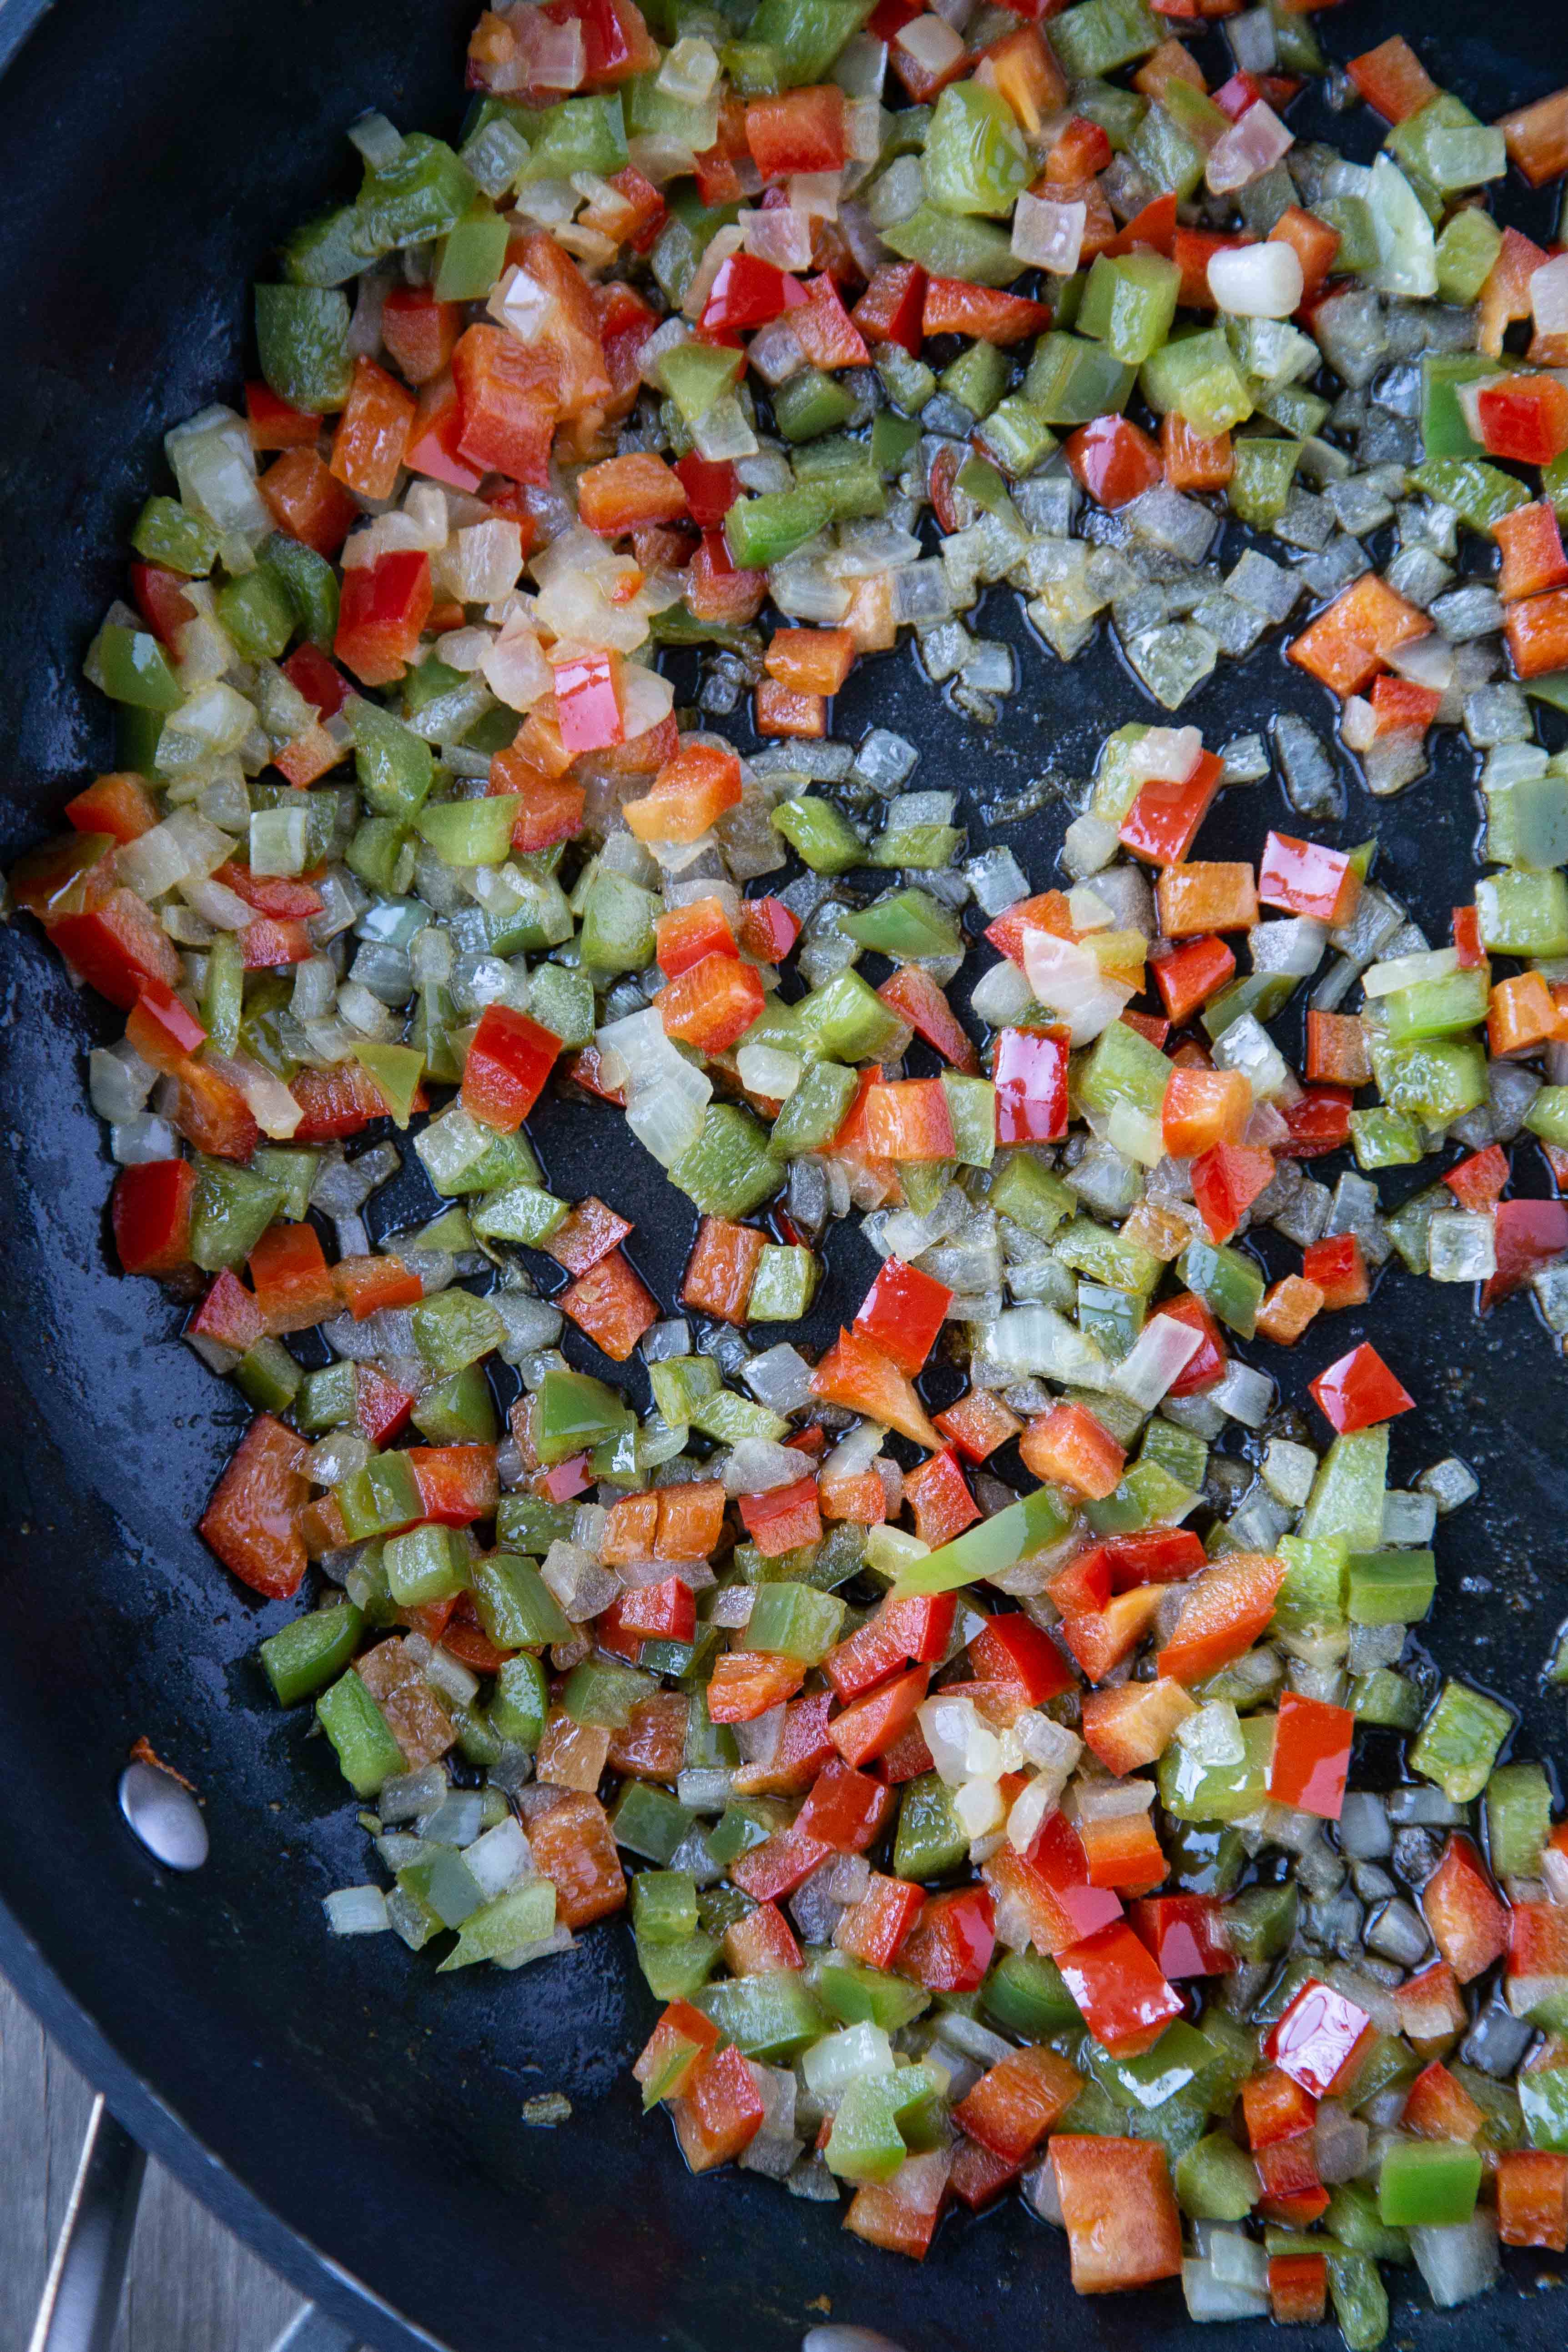 onions, red peppers, and poblano peppers cooking in a sauté pan